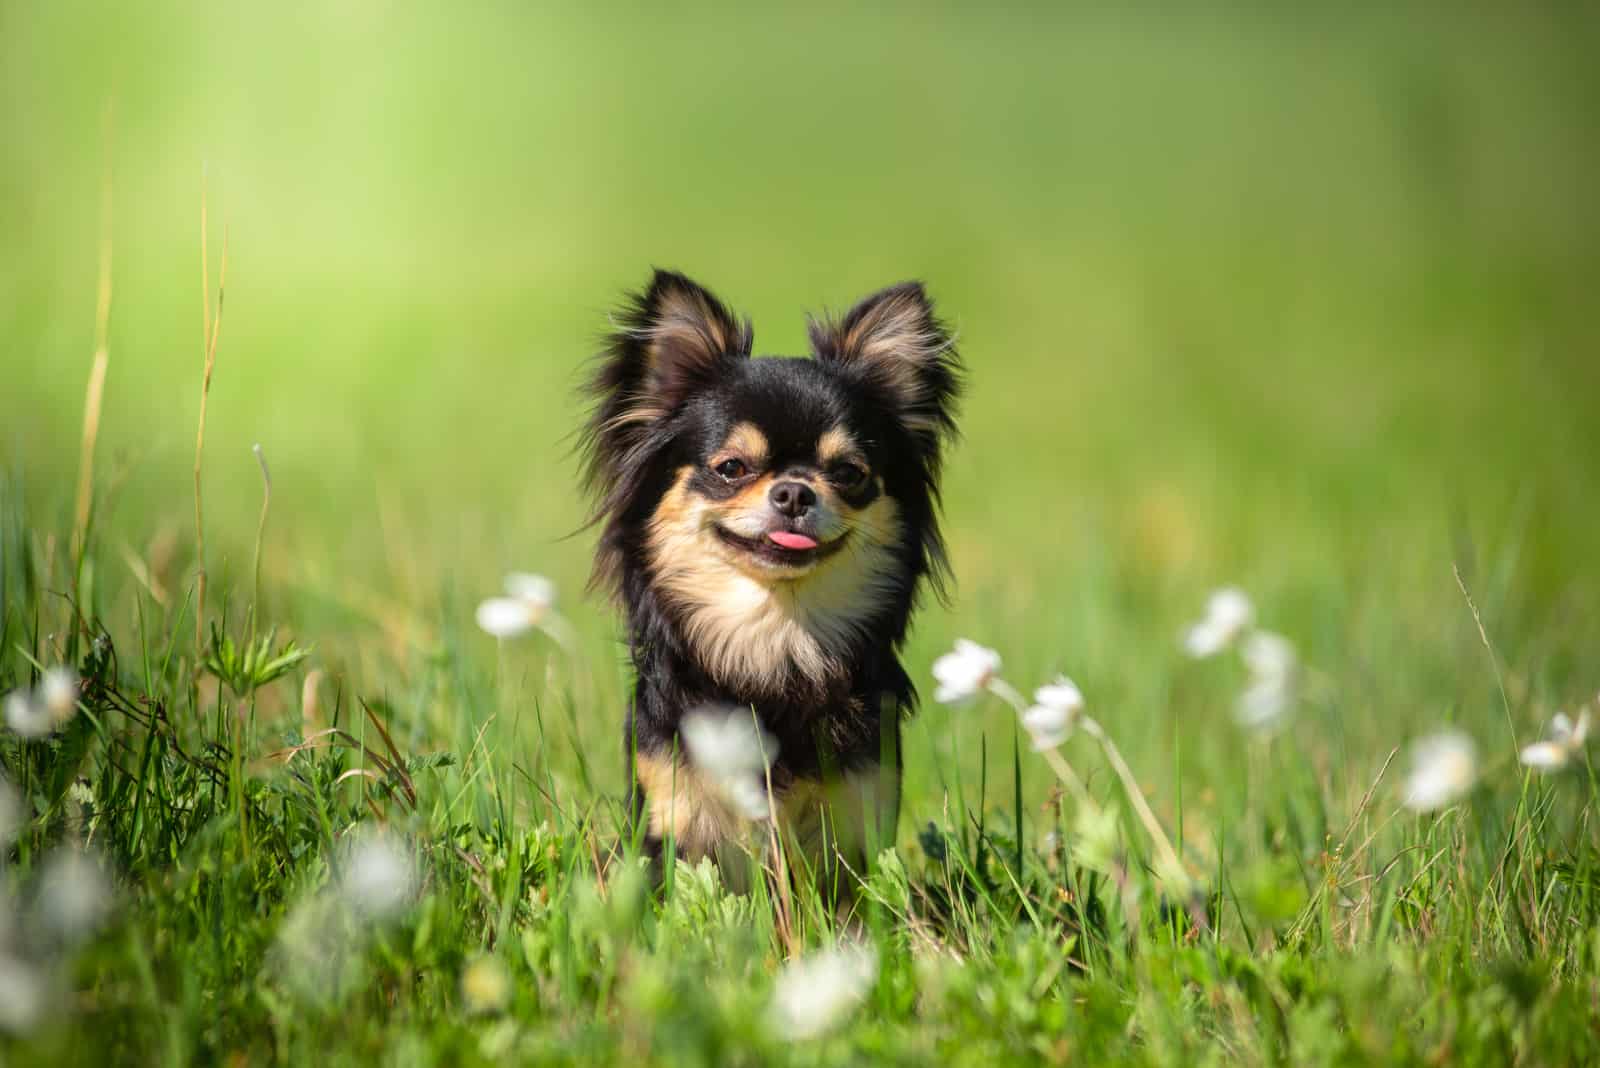 A Chihuahua dog in a Sunny clearing